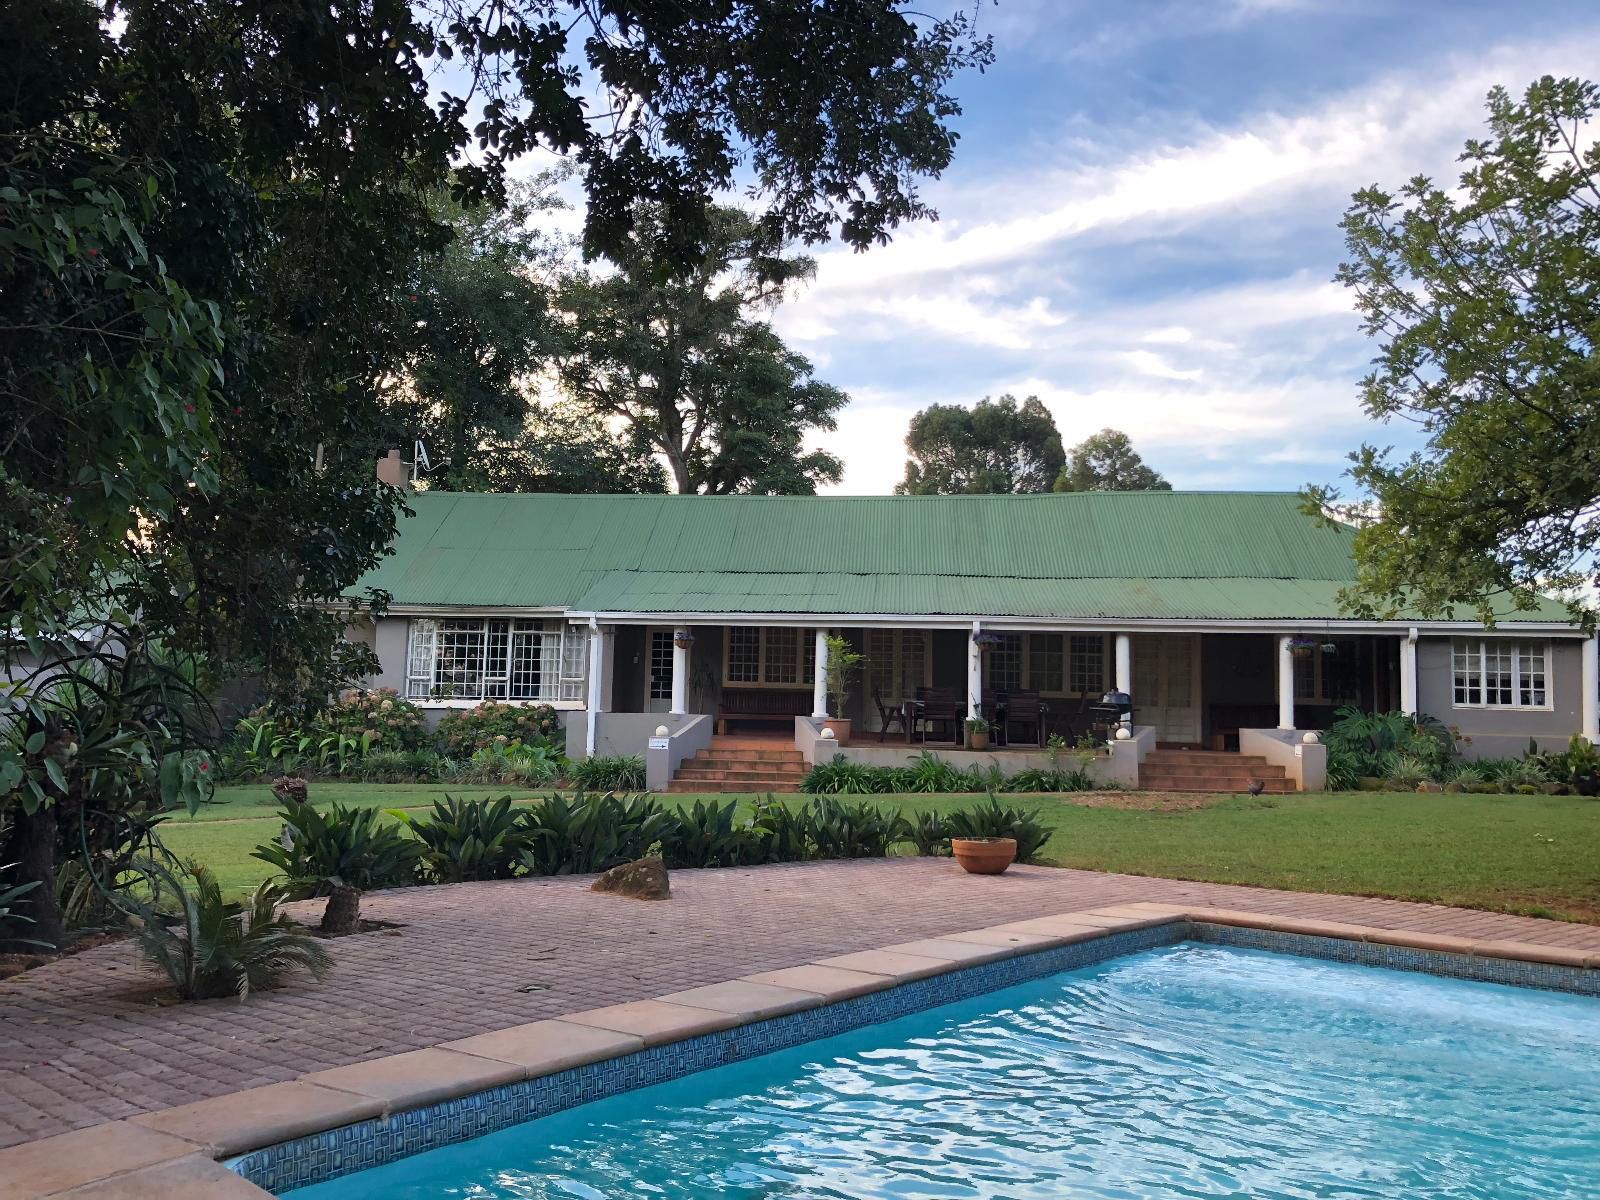 El Roi Guest Lodge White River Mpumalanga South Africa House, Building, Architecture, Swimming Pool